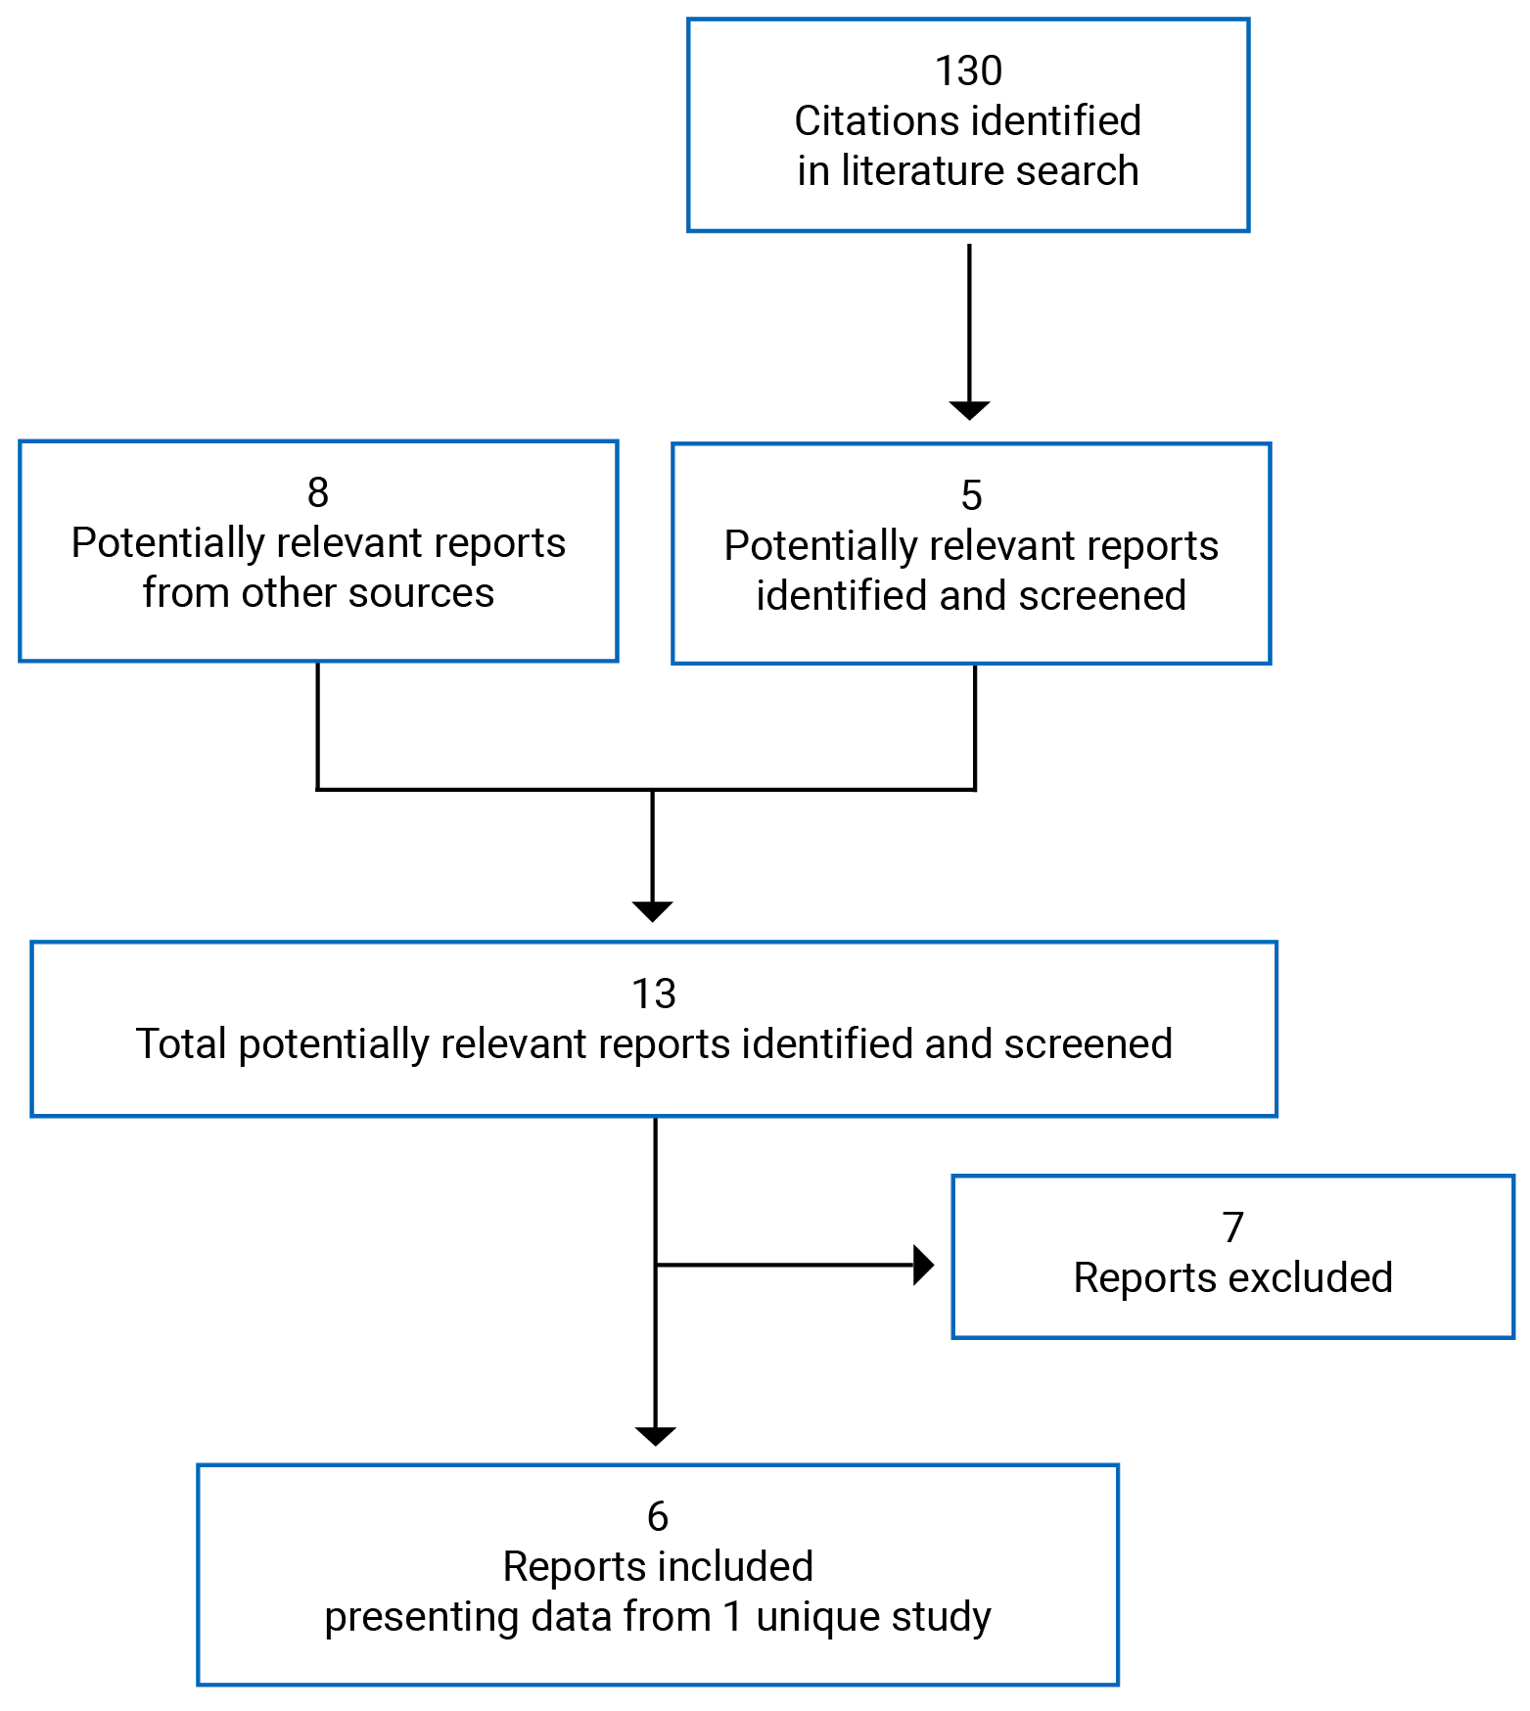 130 citations were initially identified and 125 were excluded, while 8 potentially relevant reports were retrieved for scrutiny, leaving a total of 13 reports screened in full-text, of which 7 were excluded, and 6 are included in the review. These 6 reports represent 1 study (LIBRETTO-001).